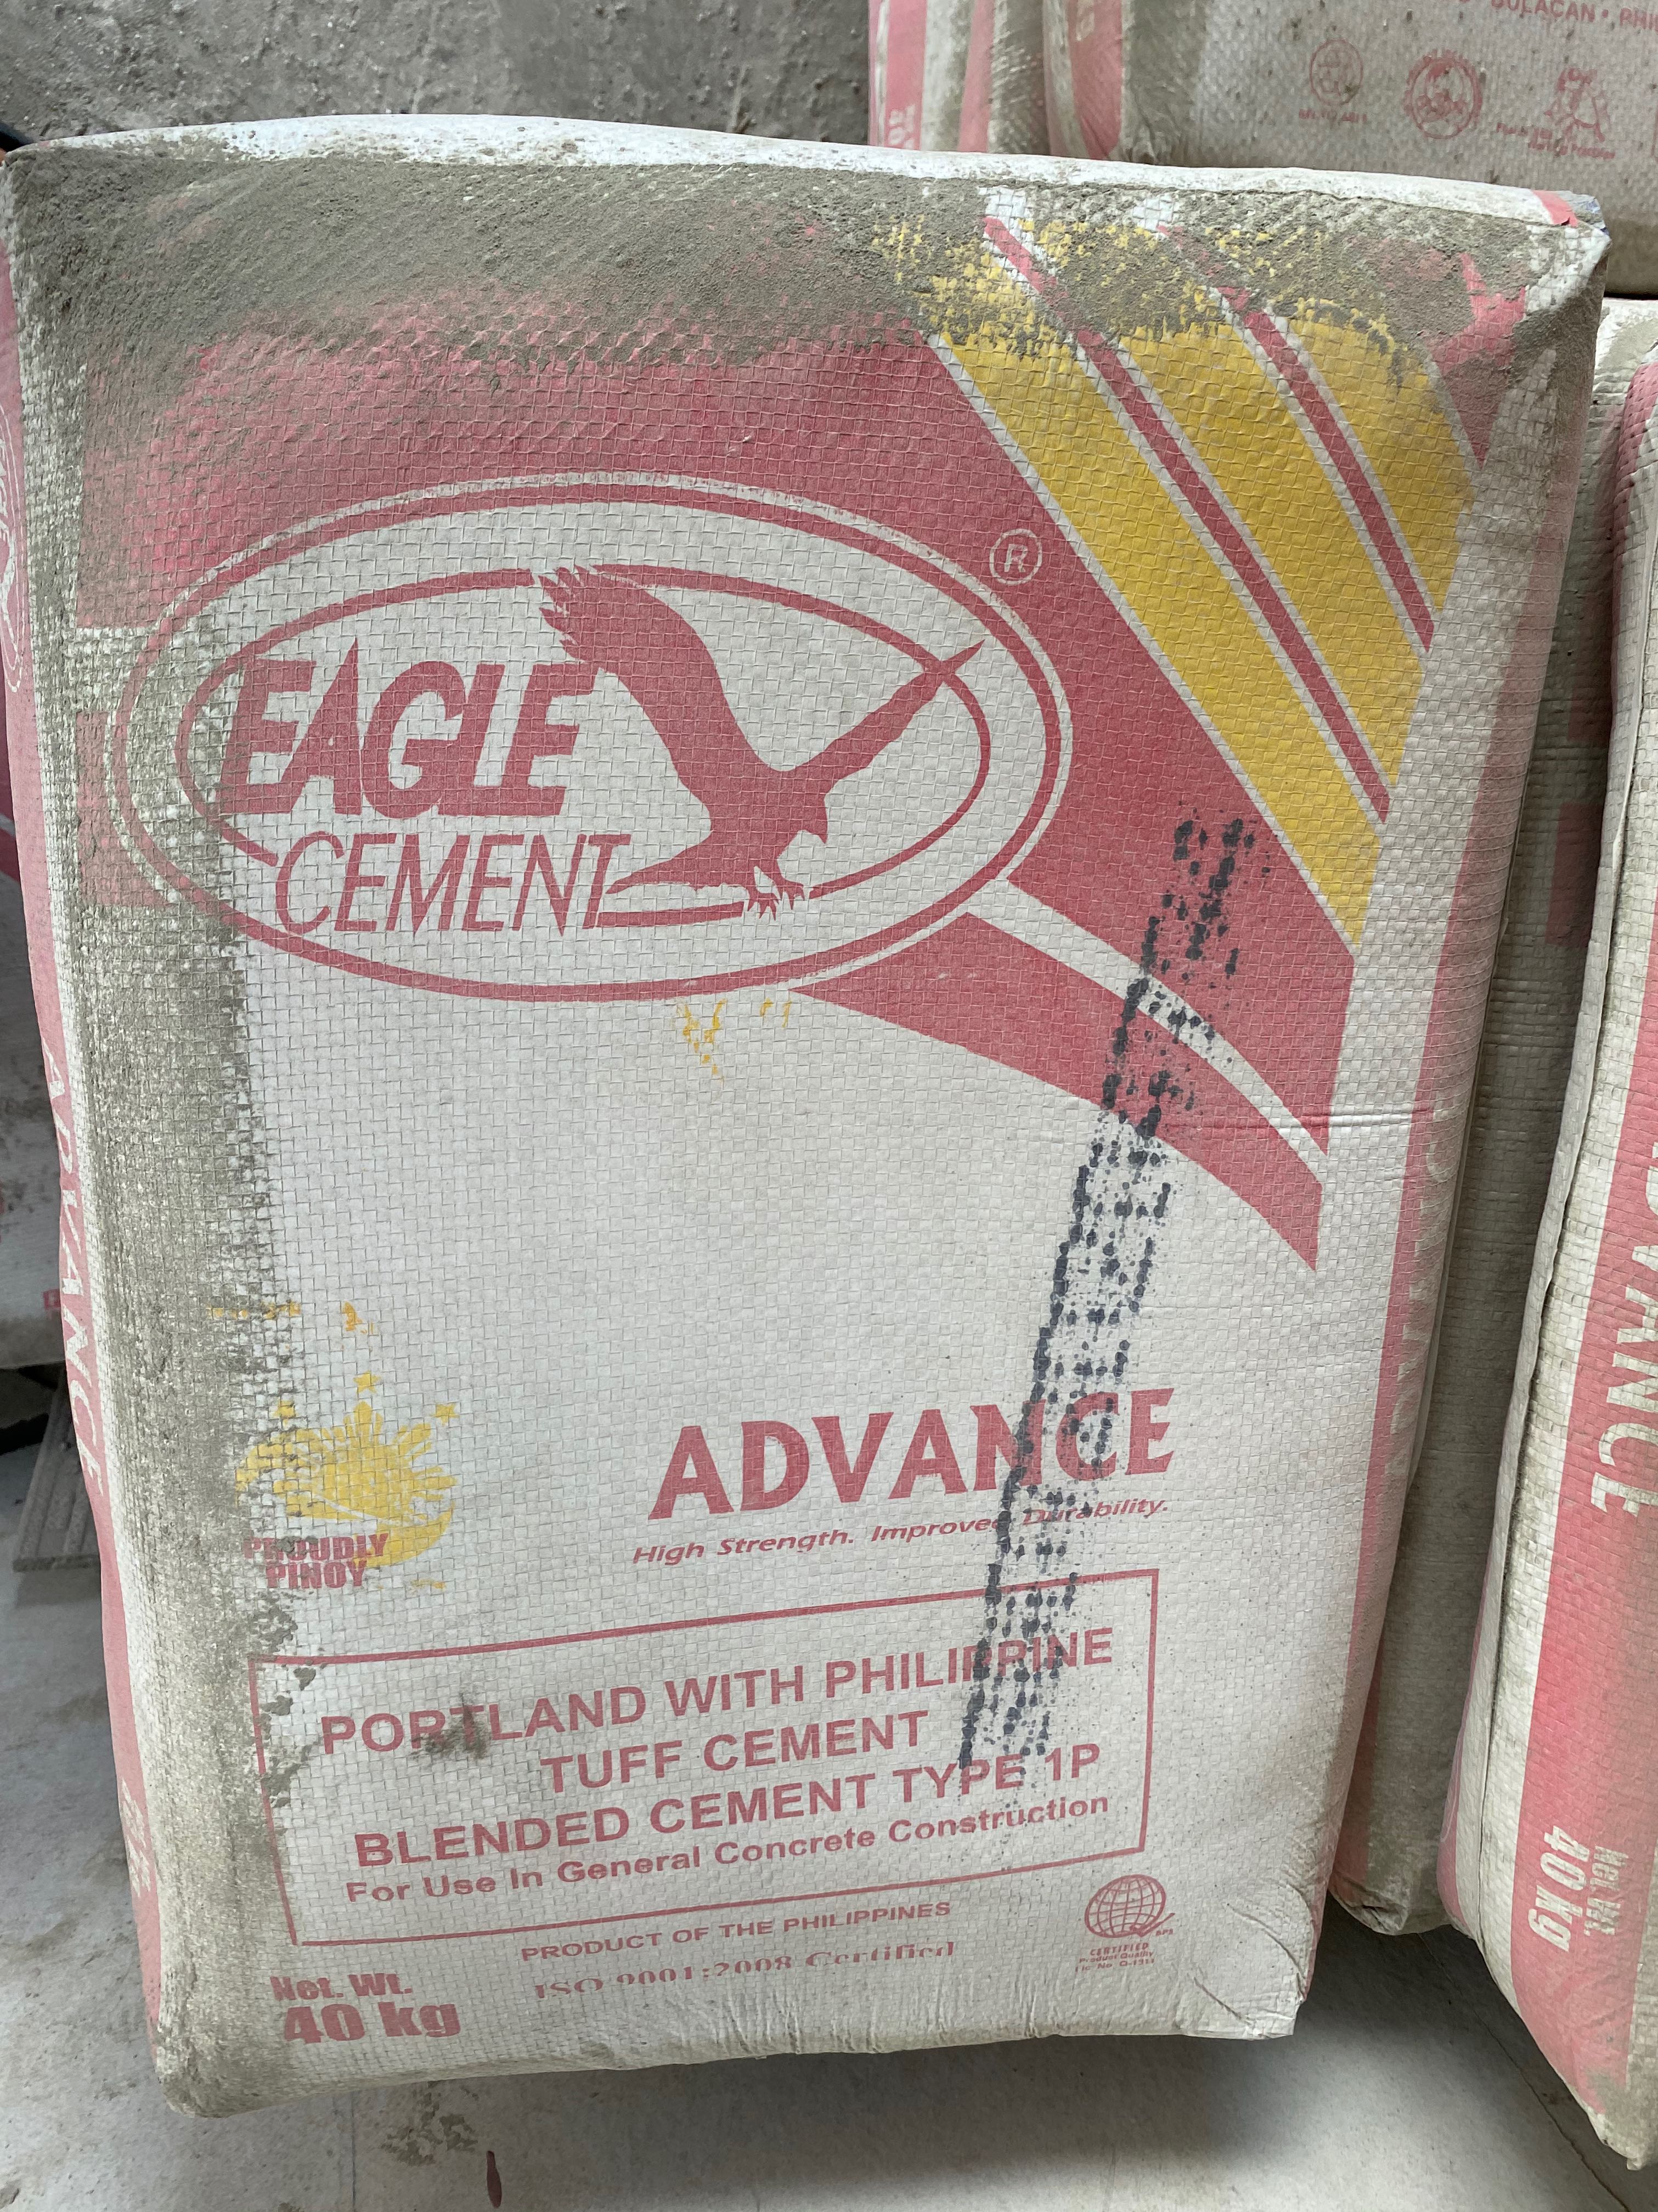 The volume of cement in a bag (25 kg, 40 kg, 50 kg): calculation and table